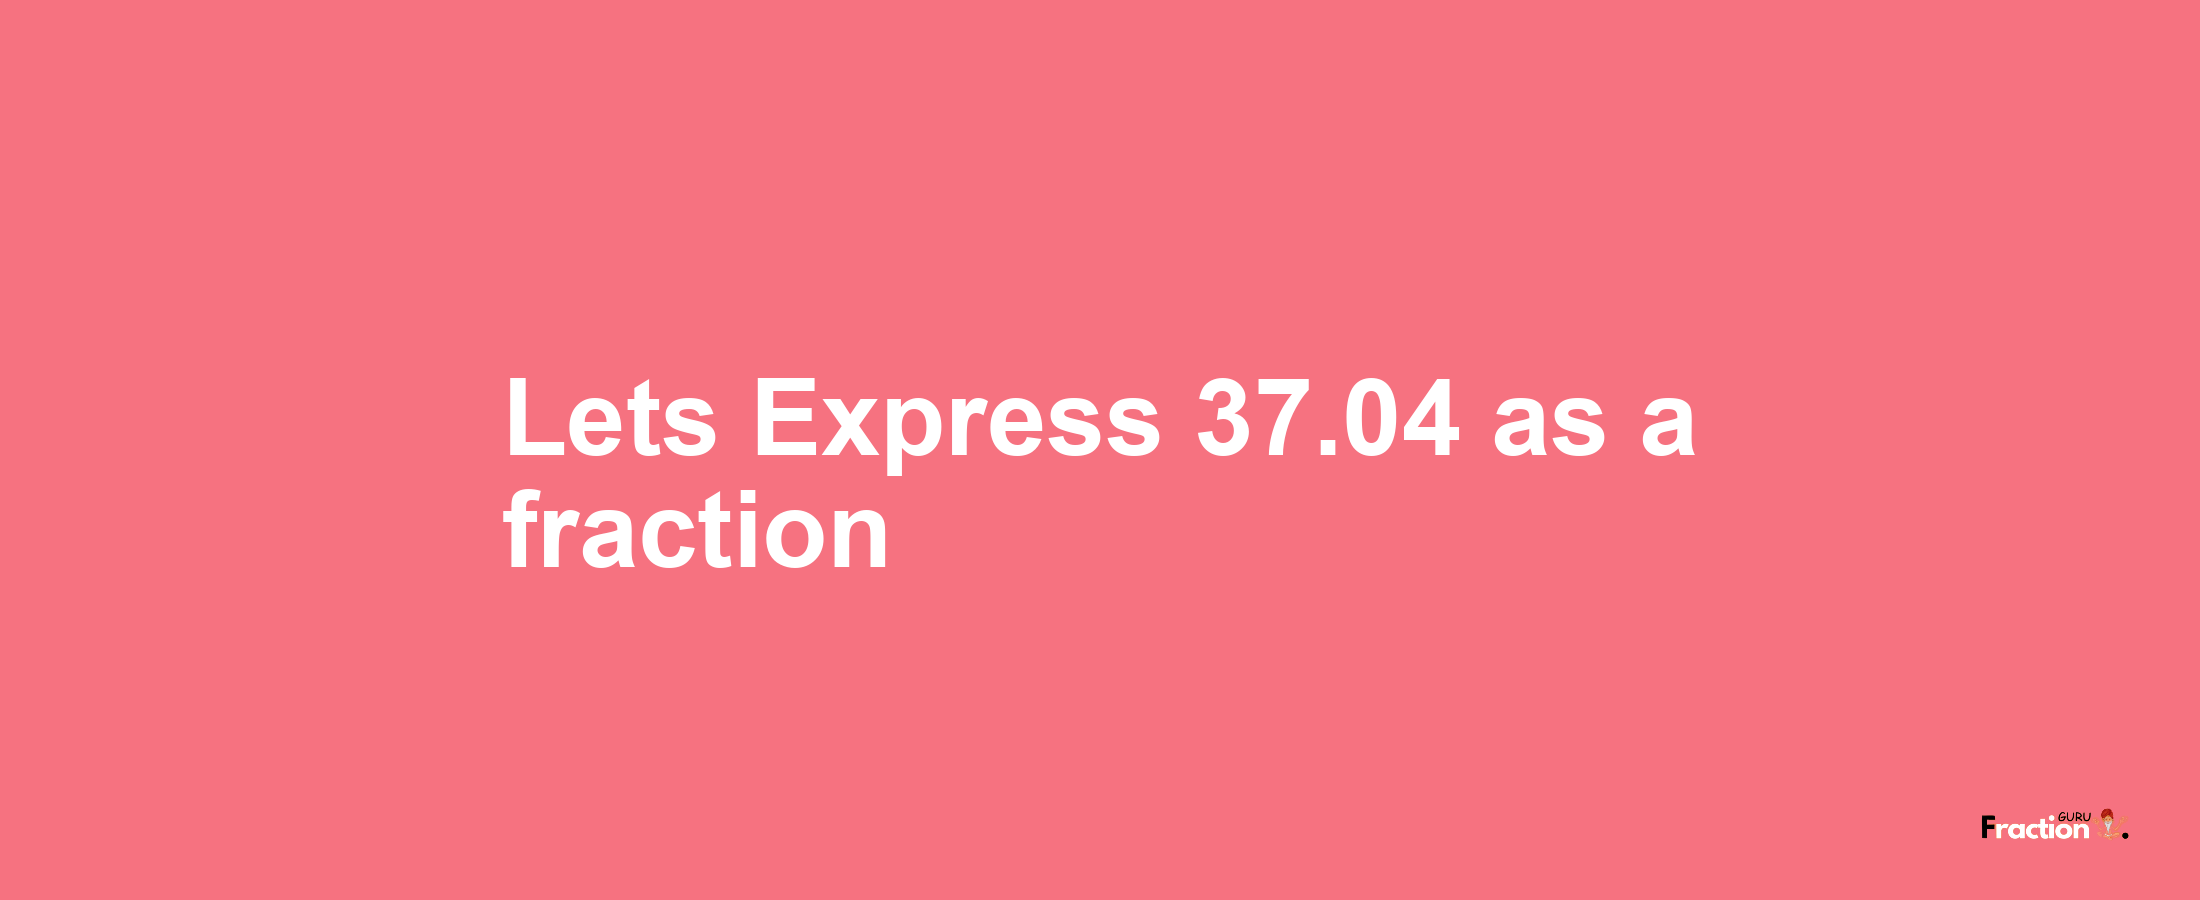 Lets Express 37.04 as afraction